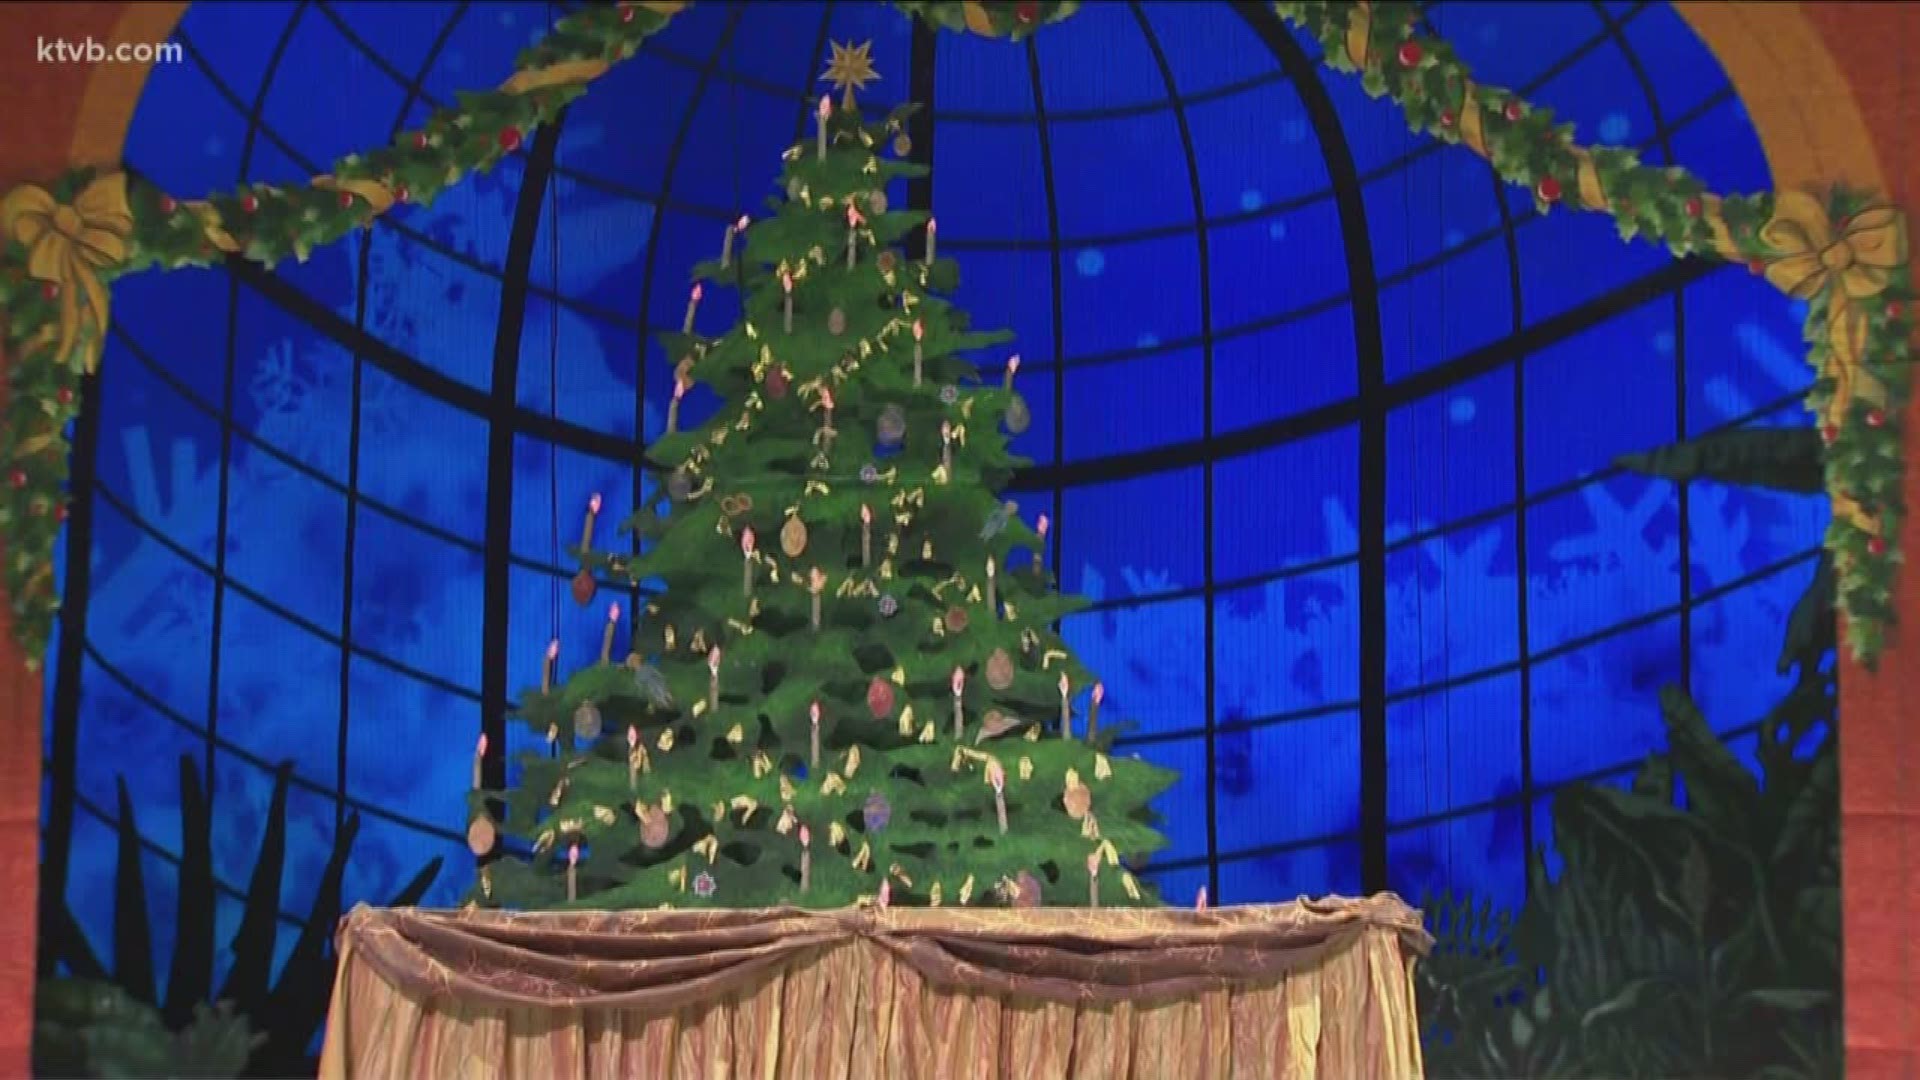 This year's production of "The Nutcracker" is the biggest production ever for Ballet Idaho. We got a sneak peek at some elements that will make it spectacular.